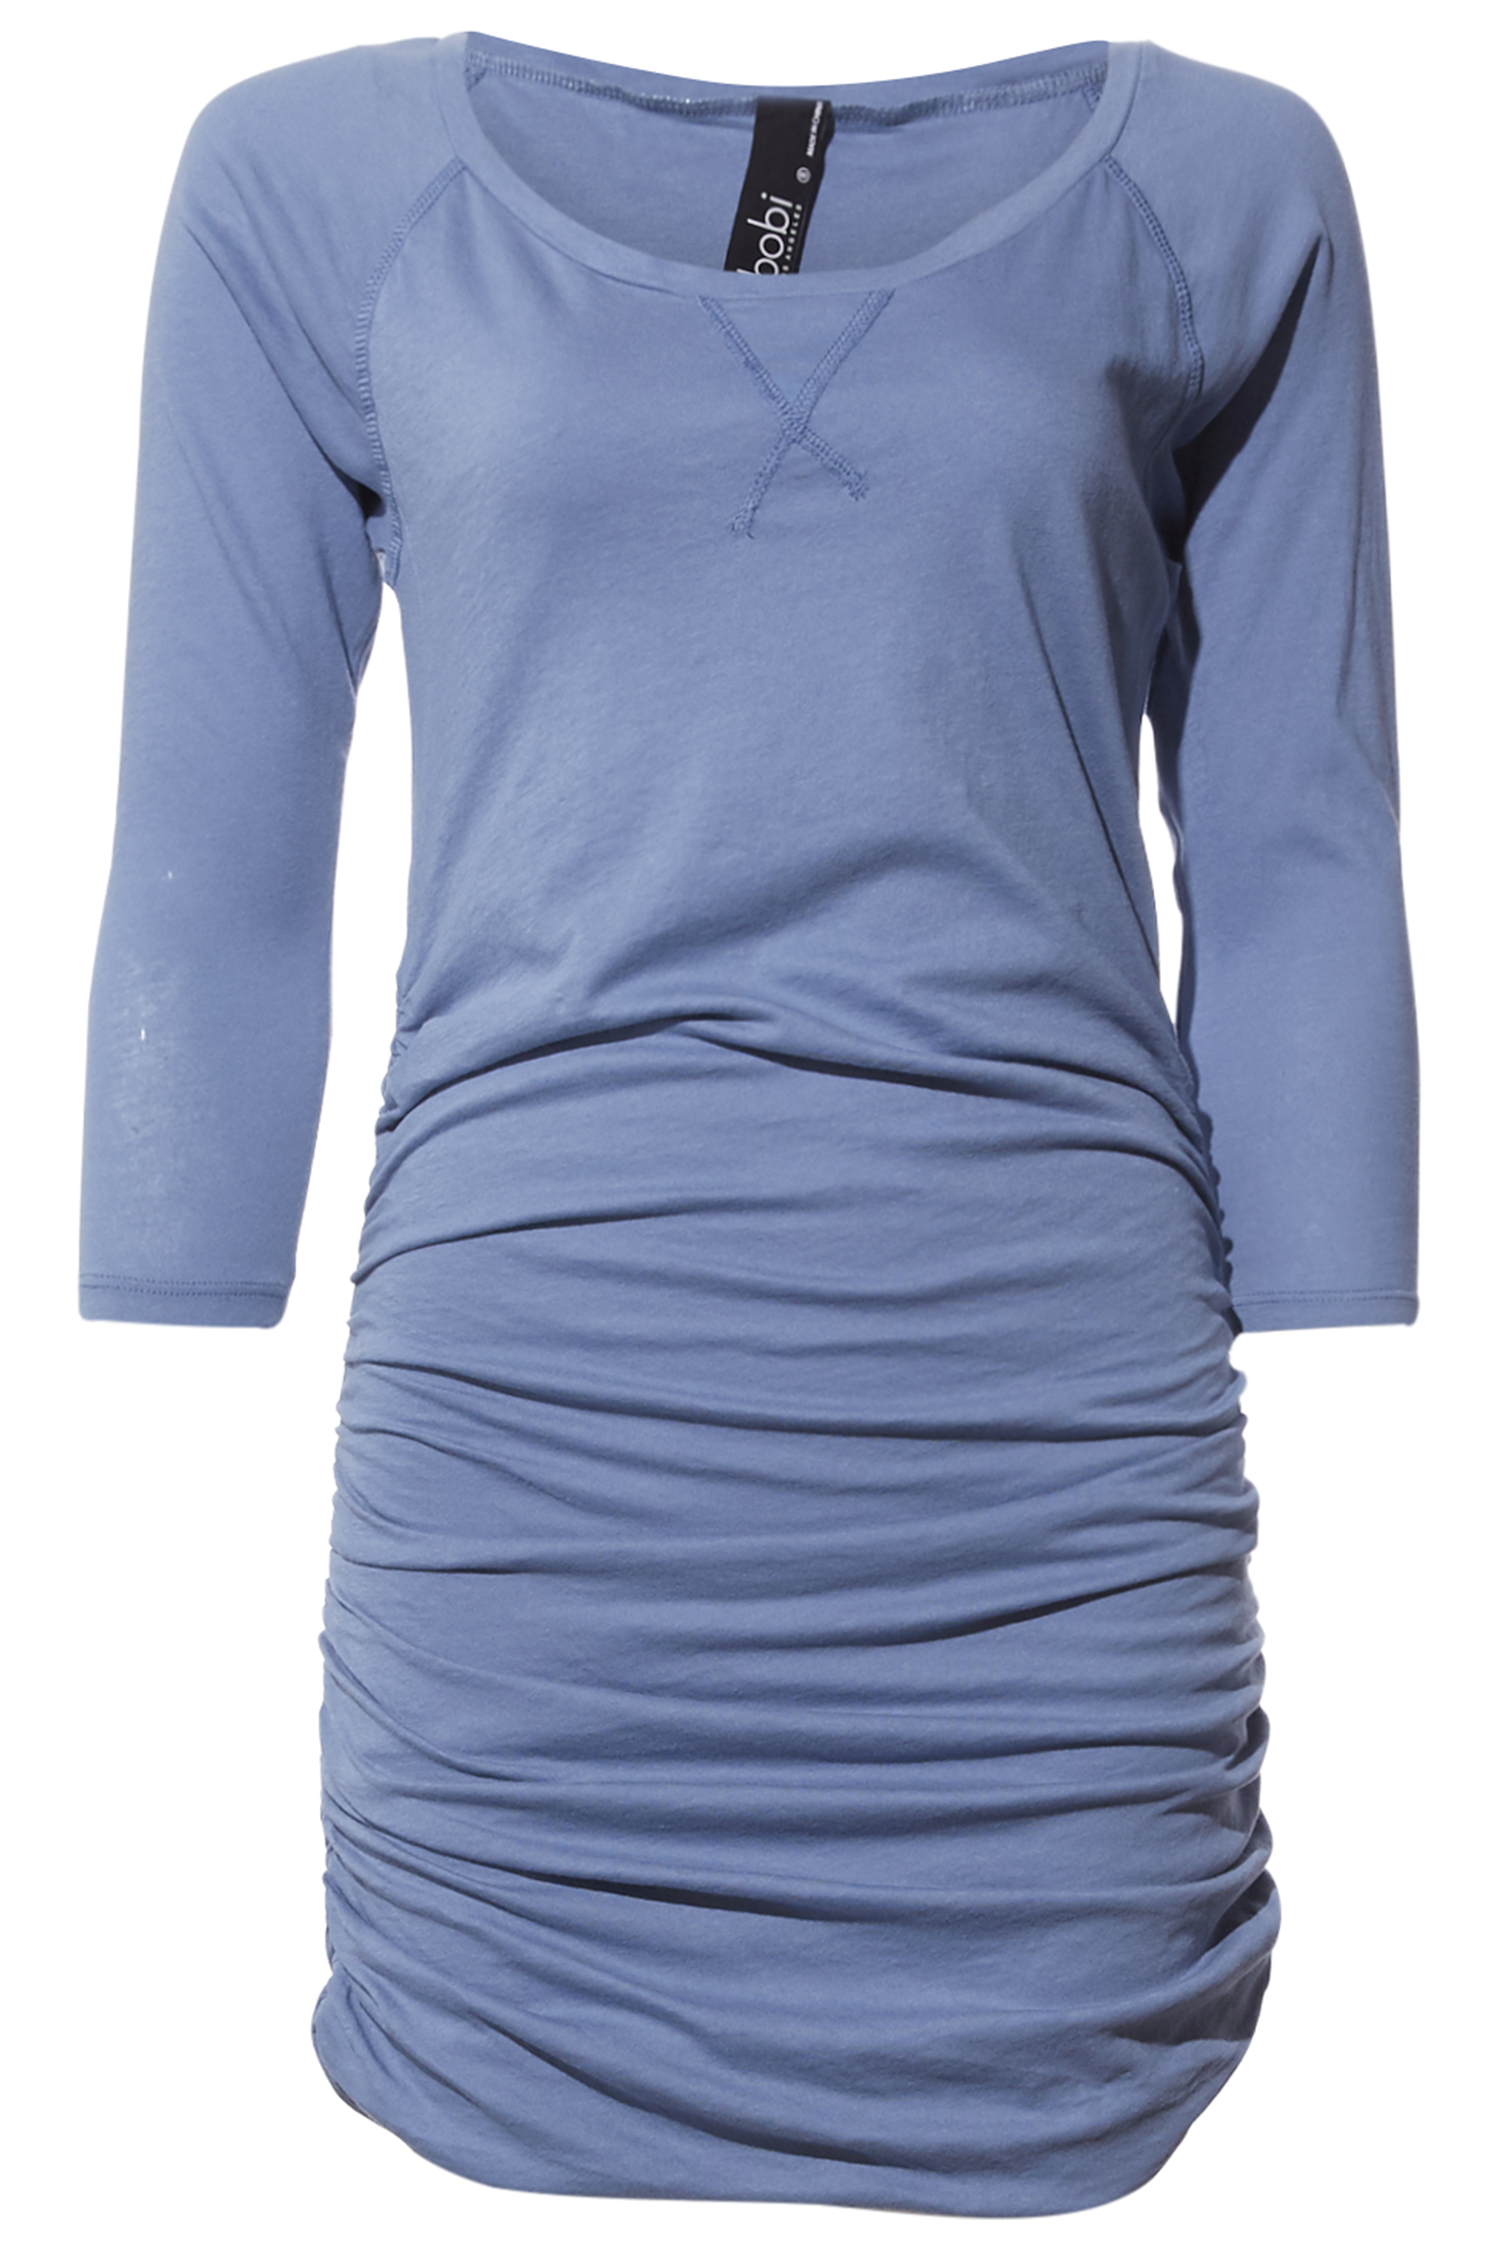 3/4 Sleeve Ruched Dress